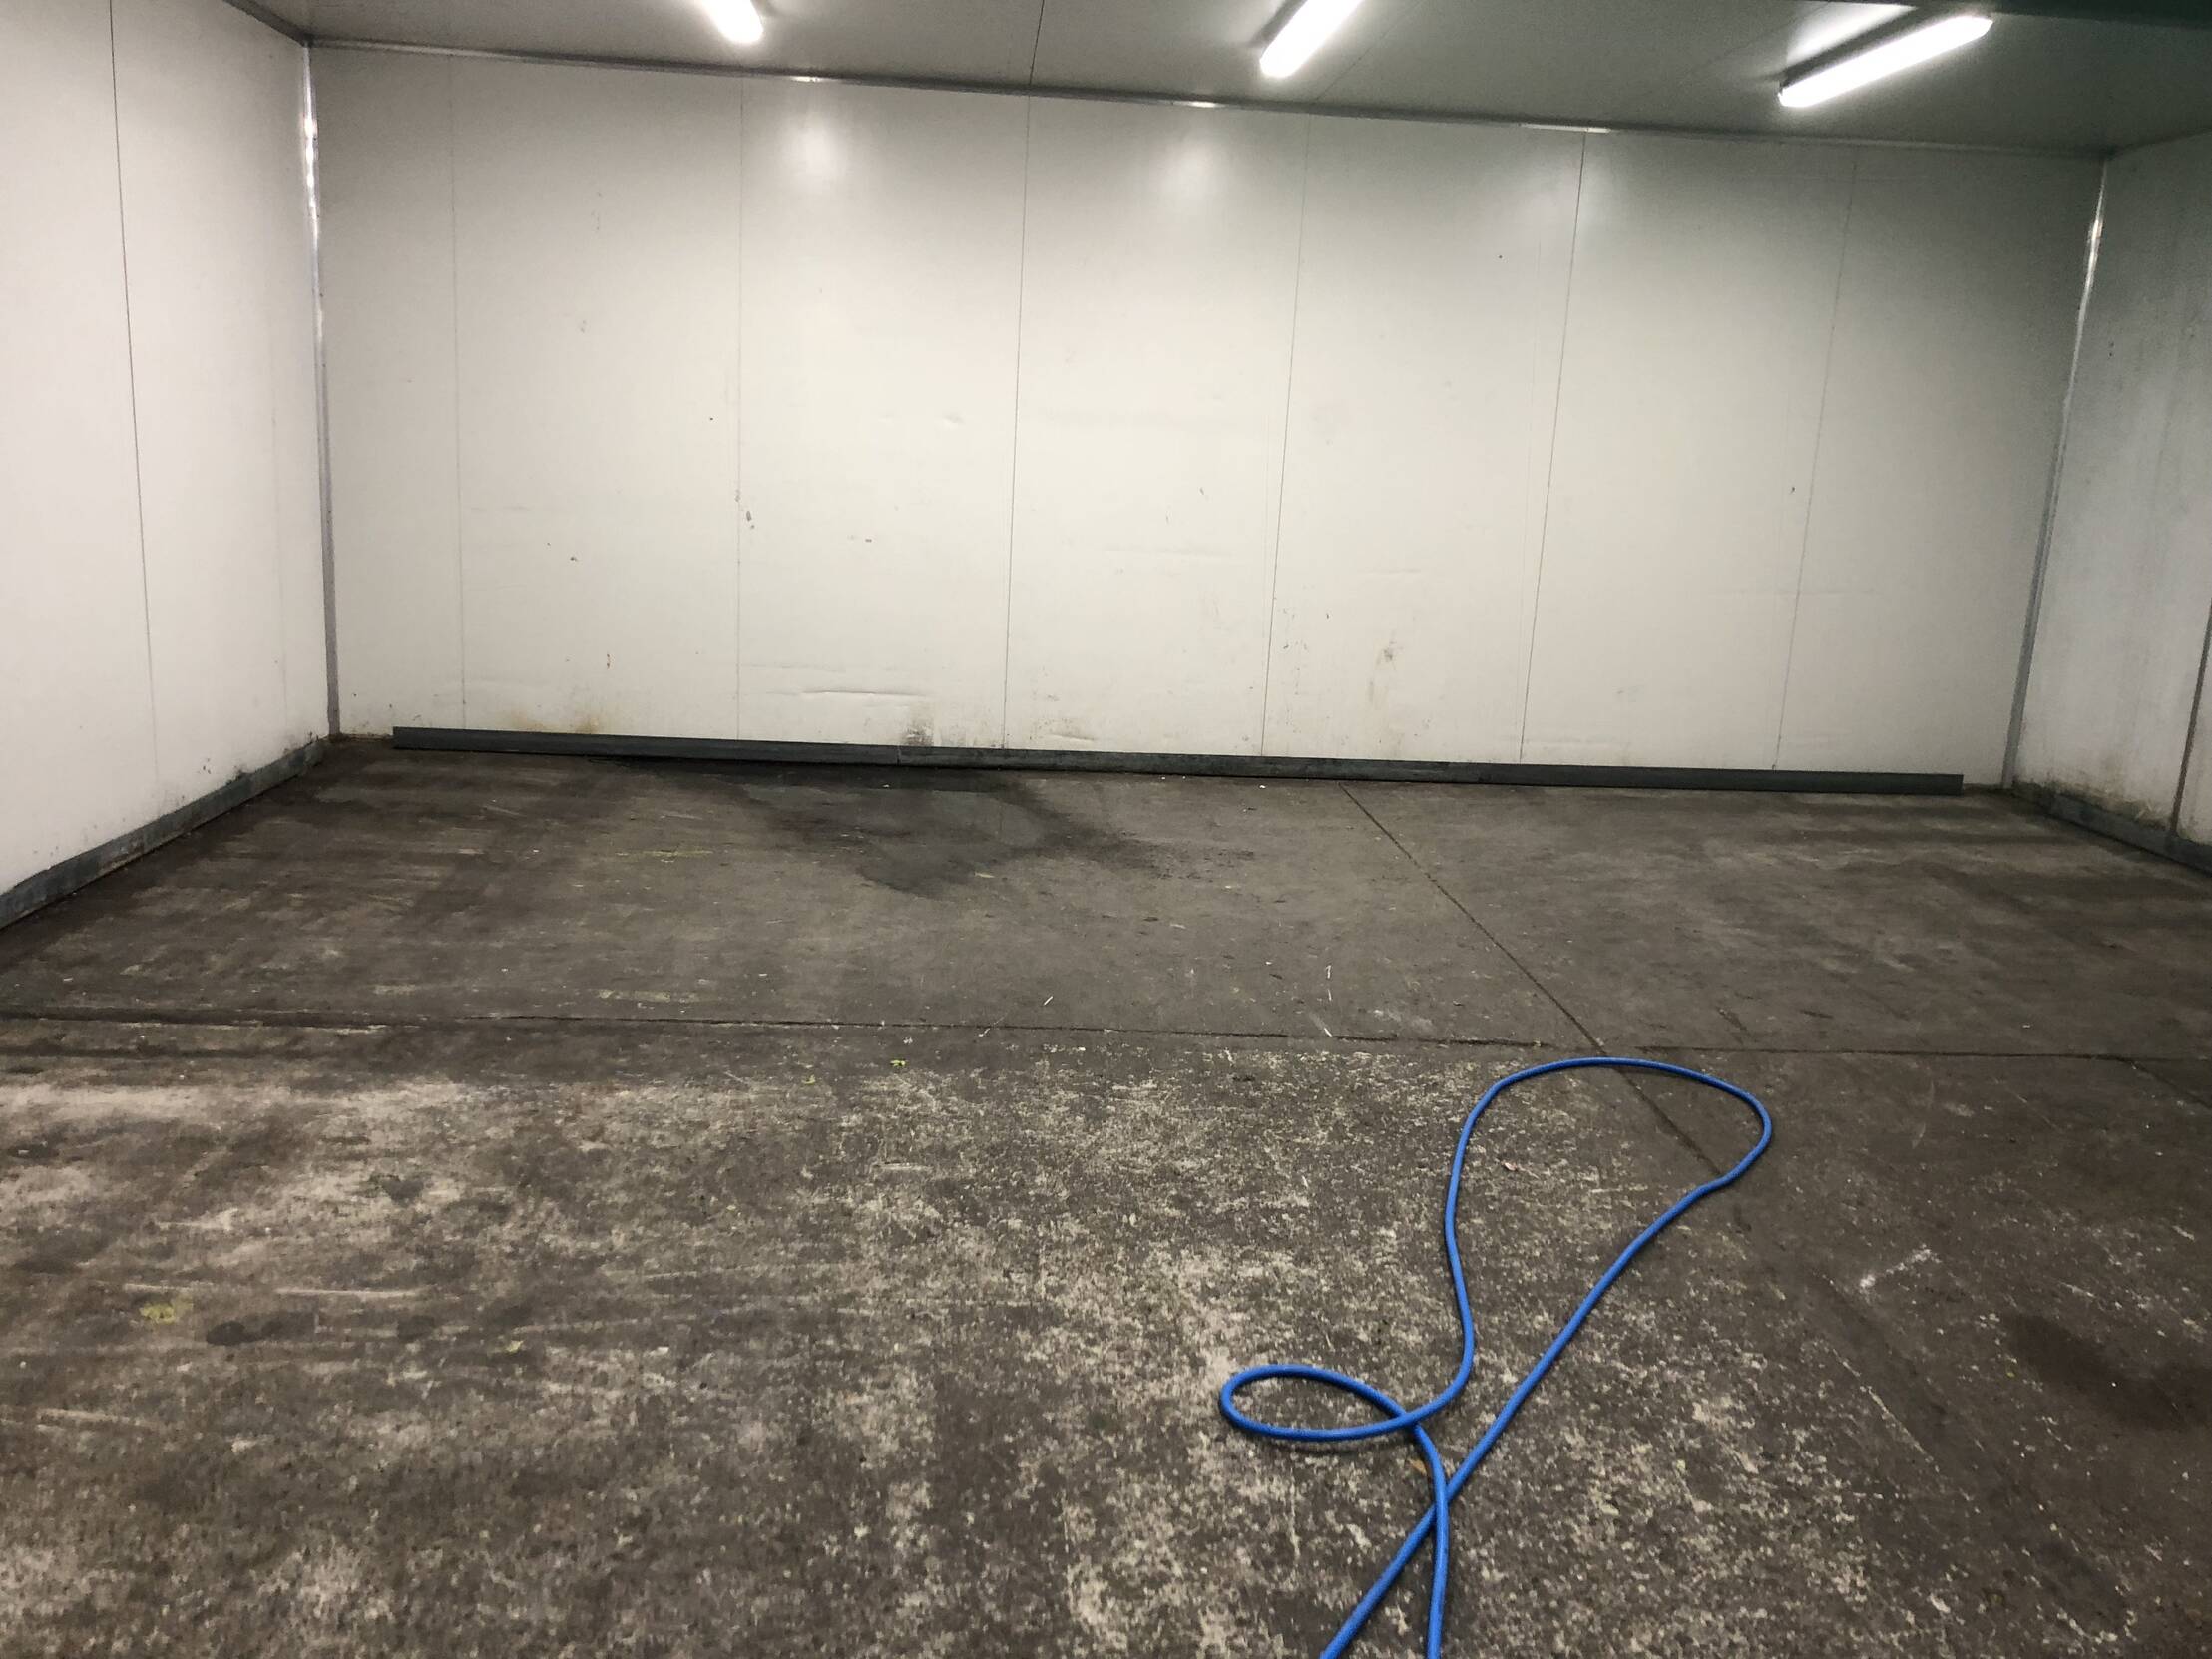 Concrete floor with a blue hose pipe